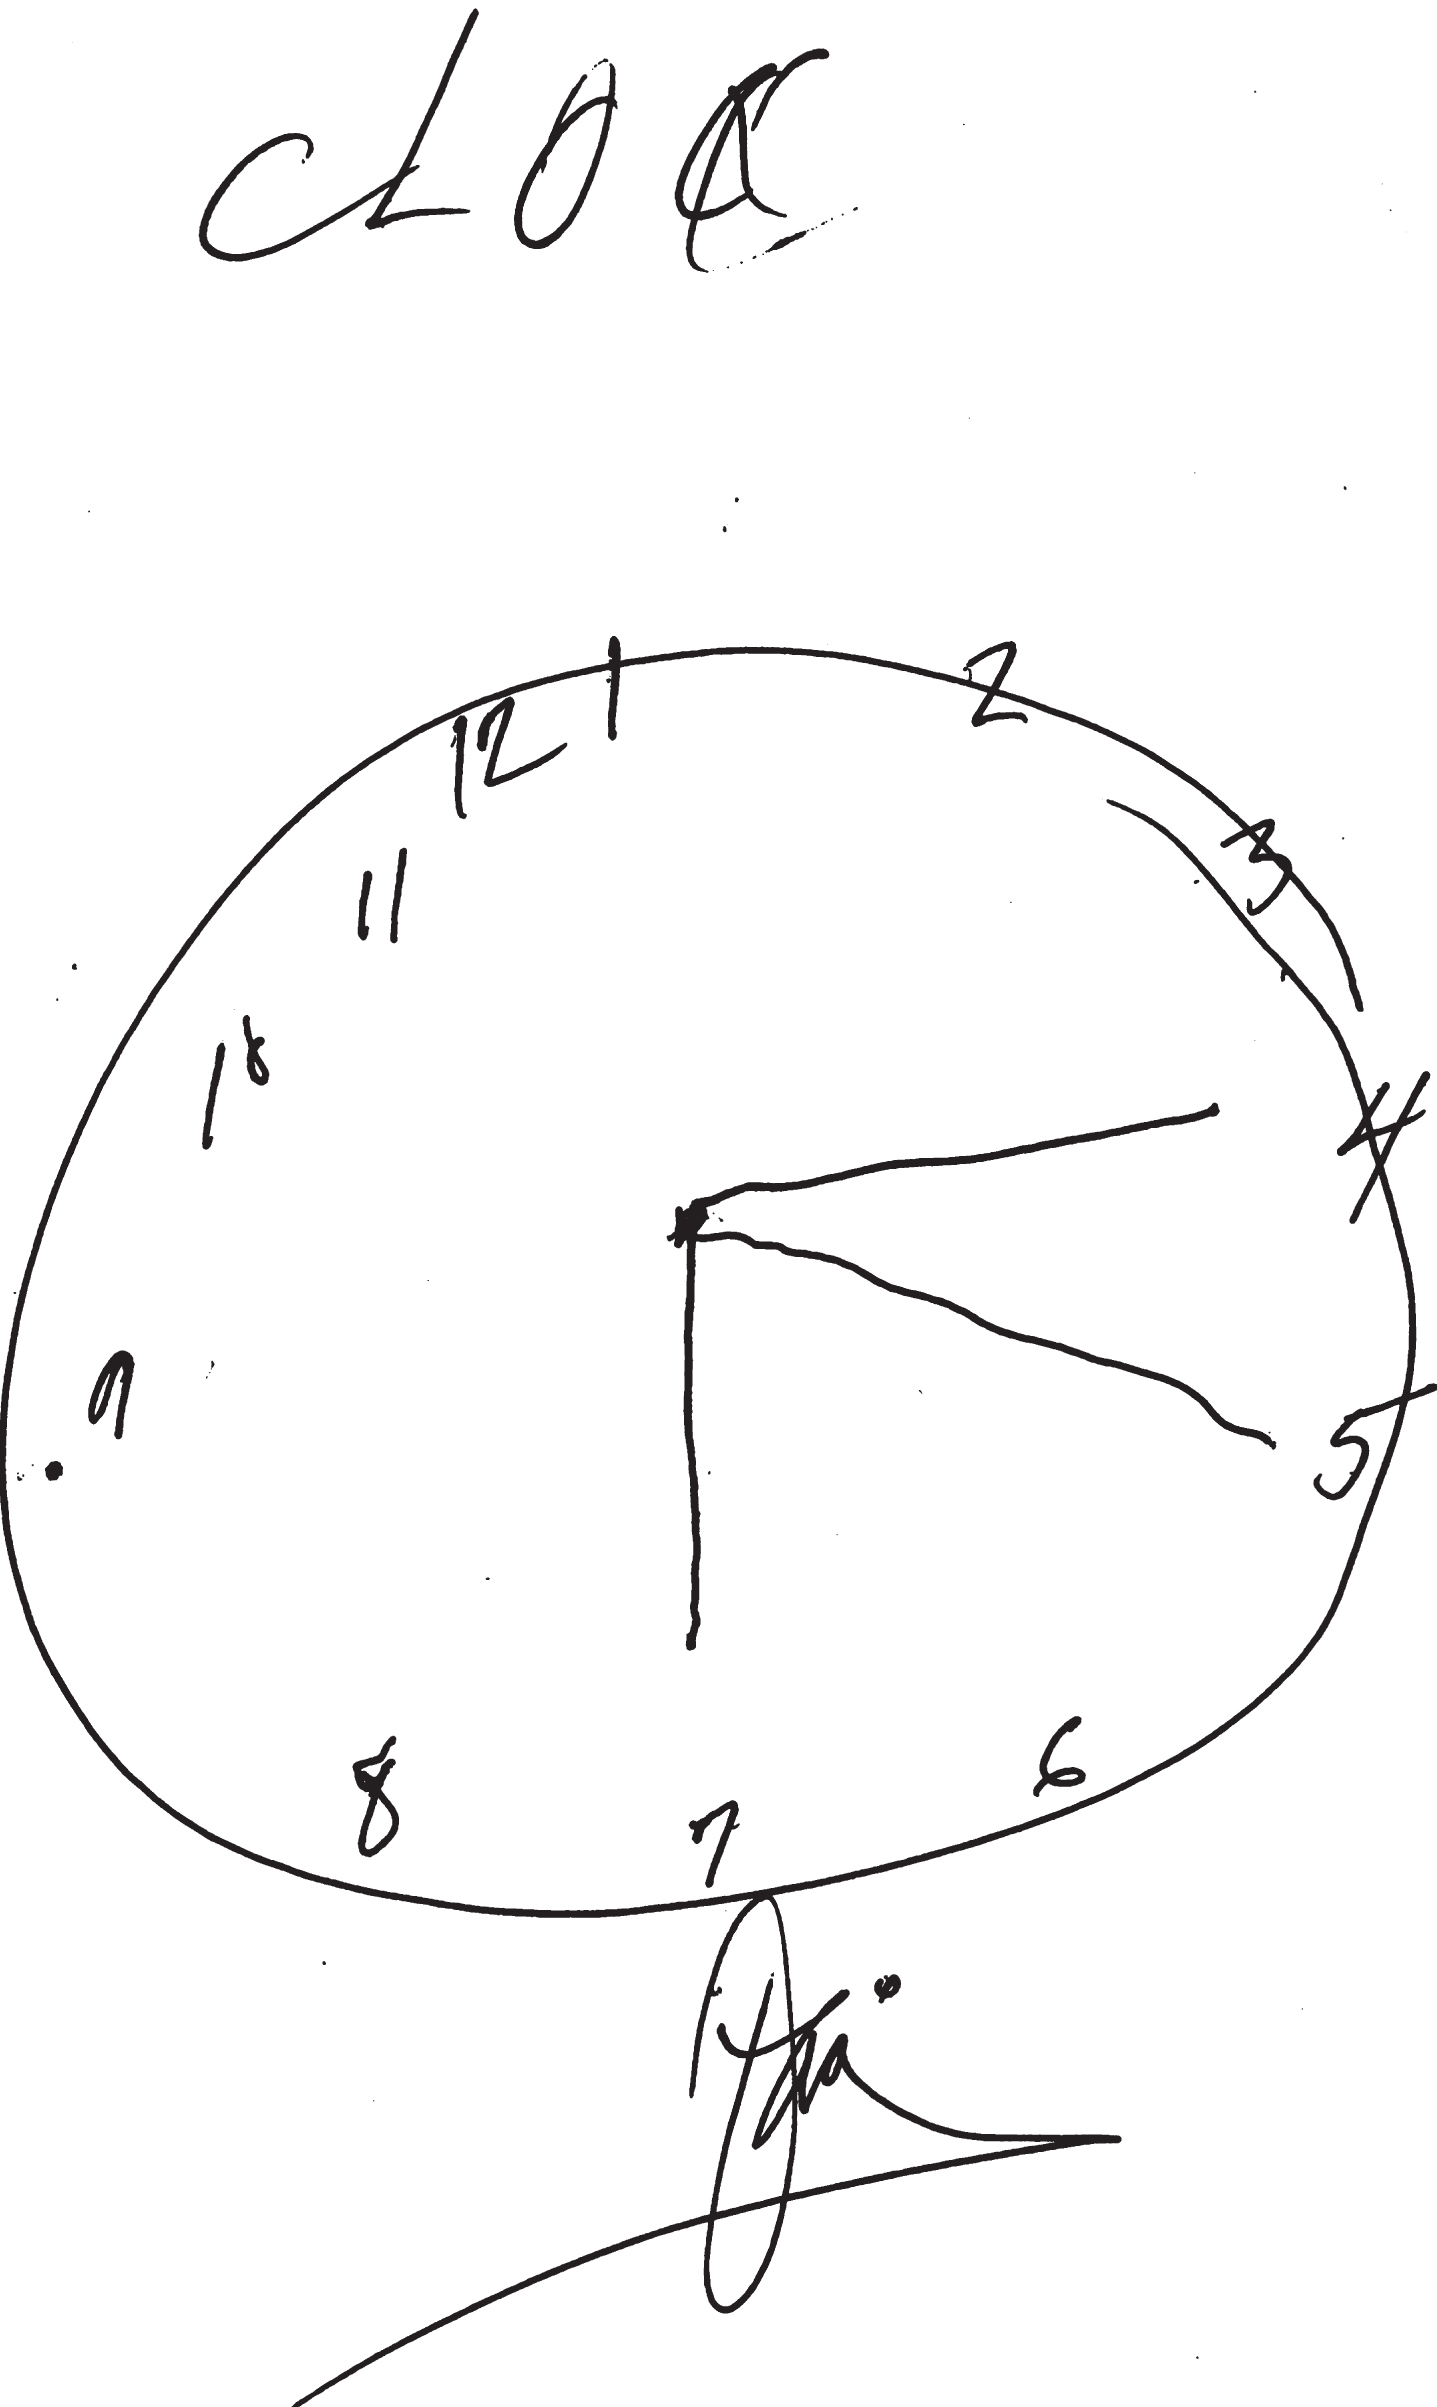 Executive Clock-Drawing Task (CLOX): The patient is instructed to draw a clock on a white sheet of paper. The instructions are as follows: “Draw a clock that says 1:45. Set the hands and numbers on the face of the clock so that even a child could read them.” The instructions can be repeated until they are clearly understood, but once the subject begins to draw no further assistance is allowed. This patient scored 7/15 points. The subject’s performance is scored as follows: Does figure resemble a clock? 1 point; Circular face present? 1 point; Dimensions >1 inch? 1 point; All numbers inside the perimeter? 1 point; No sectoring or tic marks? 1 point; Numbers 12, 6, 3, & 9 placed first? 1 point; Spacing Intact? (Symmetry on either side of 12 and 6 o’clock?) 1 point; Only Arabic numerals? 1 point; Only numbers 1 - 12 among the numerals present? 1 point; Sequence 1-12 intact? No omissions or intrusions. 1 point; Only two hands are present? 1 point; All hands represented as arrows? 1 point; Hour hand between 1 and 2 o’clock? 1 point; Minute hand obviously longer than hour? 1 point; 1 point if none of the following are present: 1) Hand pointing to 4 or 5 o’clock? 2) “1:45” present? 3) Any other notation (e.g., “ 9:00”)? 4) Any arrows point inward? 5) Intrusions from “hand” or “face” present? 6) Any letters, words or pictures? From: Royall et al., 1998 [116].